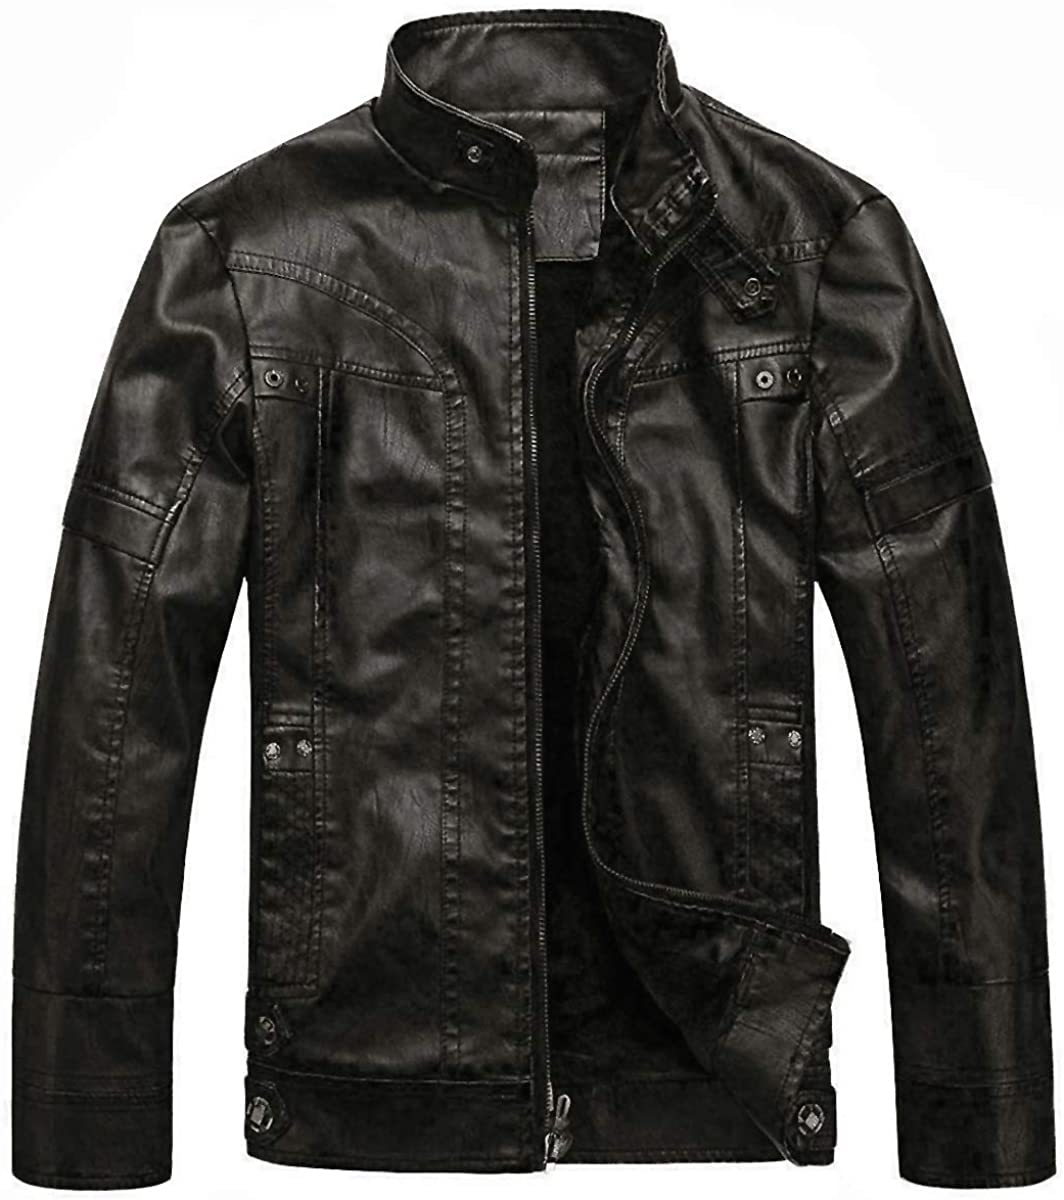 WULFUL Men's Vintage Stand Collar Leather Jacket Motorcycle PU Faux ...